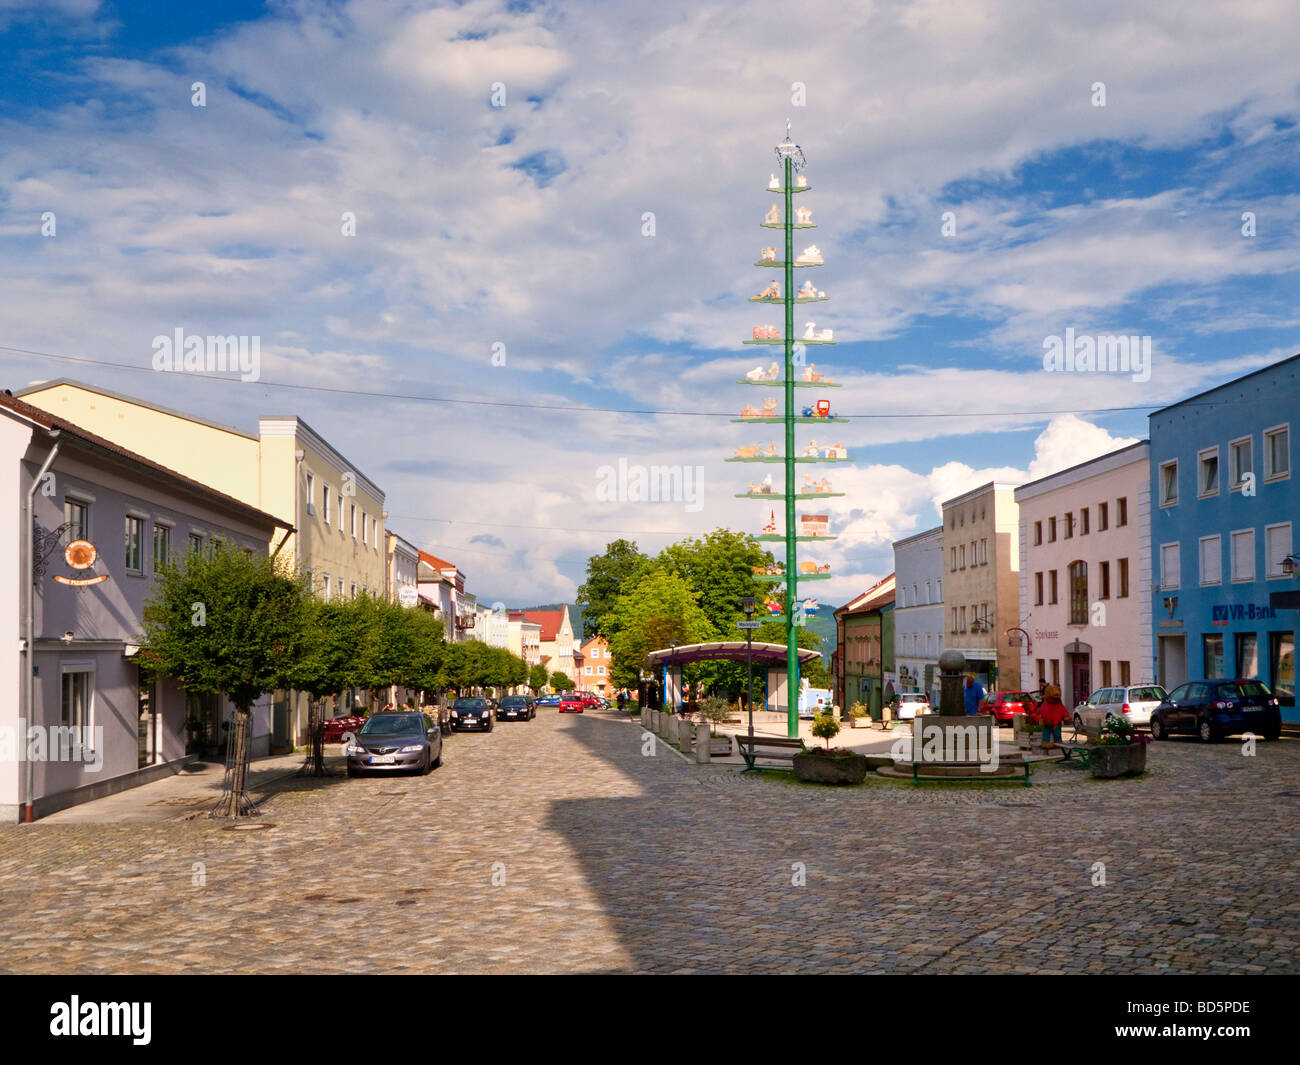 Town of Schonberg in the Bayerischer Wald, Bavarian Forest National Park,  Lower Bavaria, Germany Stock Photo - Alamy